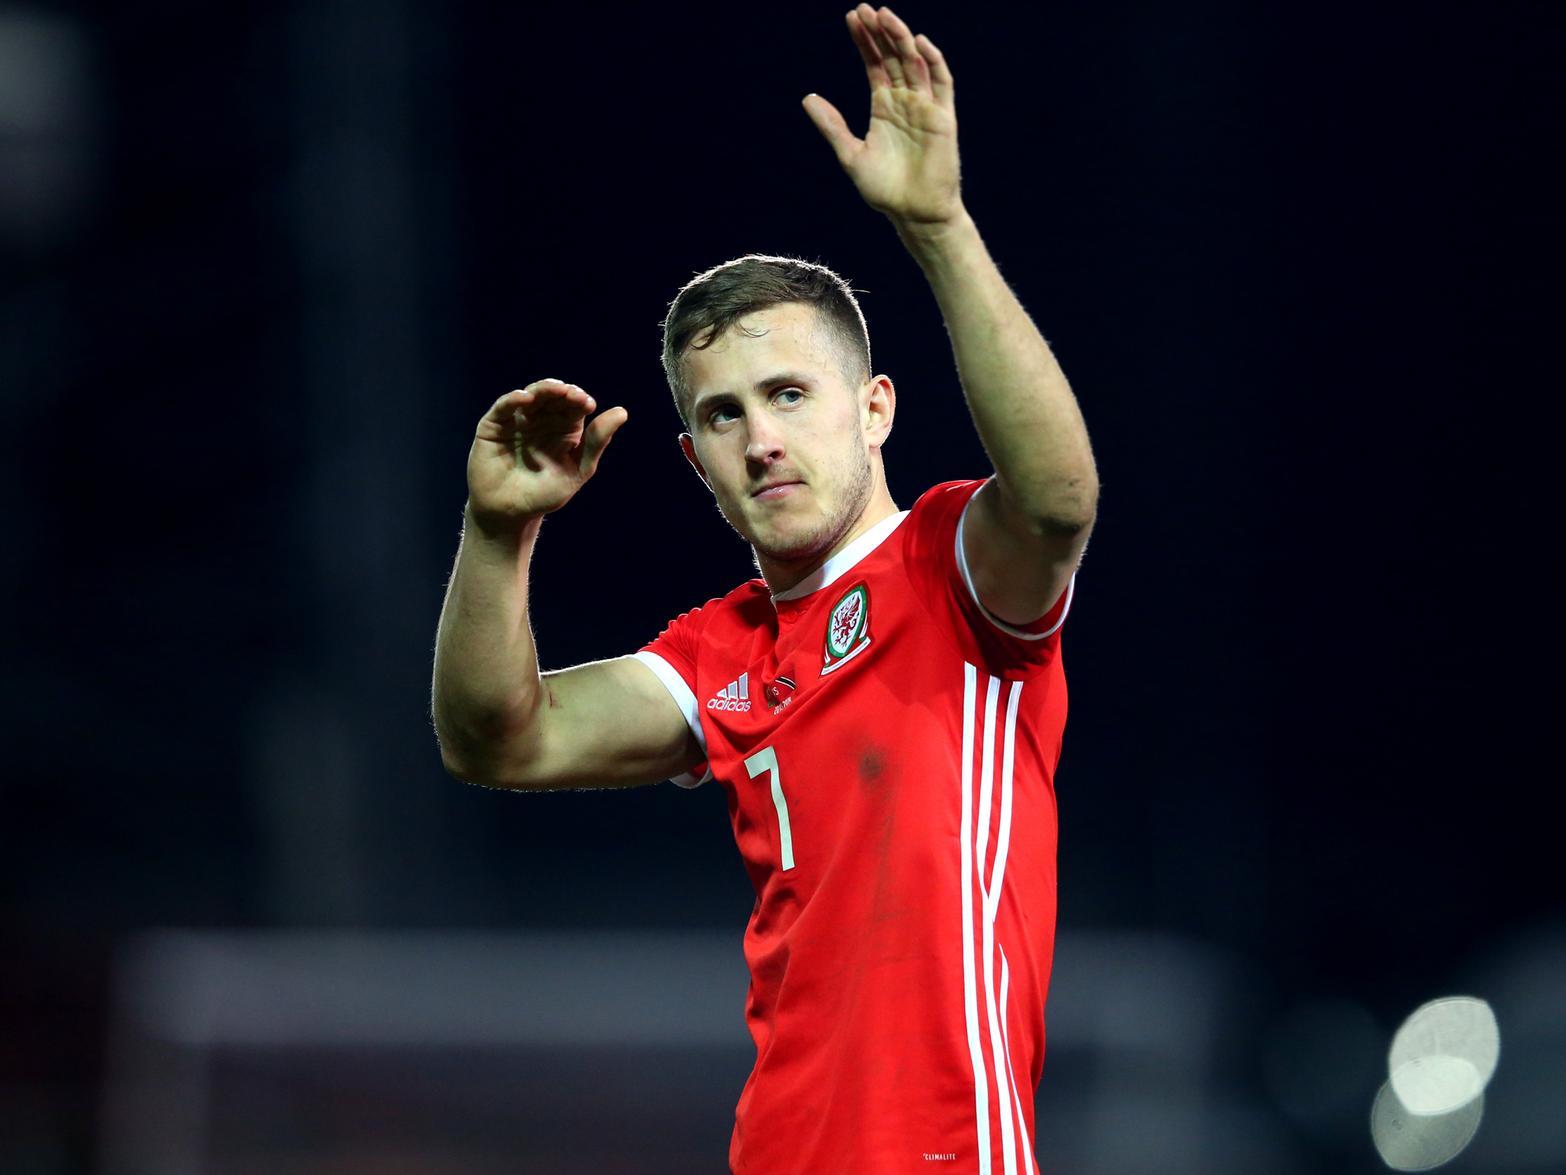 Sunderland are said to have joined the race for Cardiff City midfielder Will Vaulks, but are likely to face competition for his signature from the likes of Bristol City and Stoke. (Sky Sports)